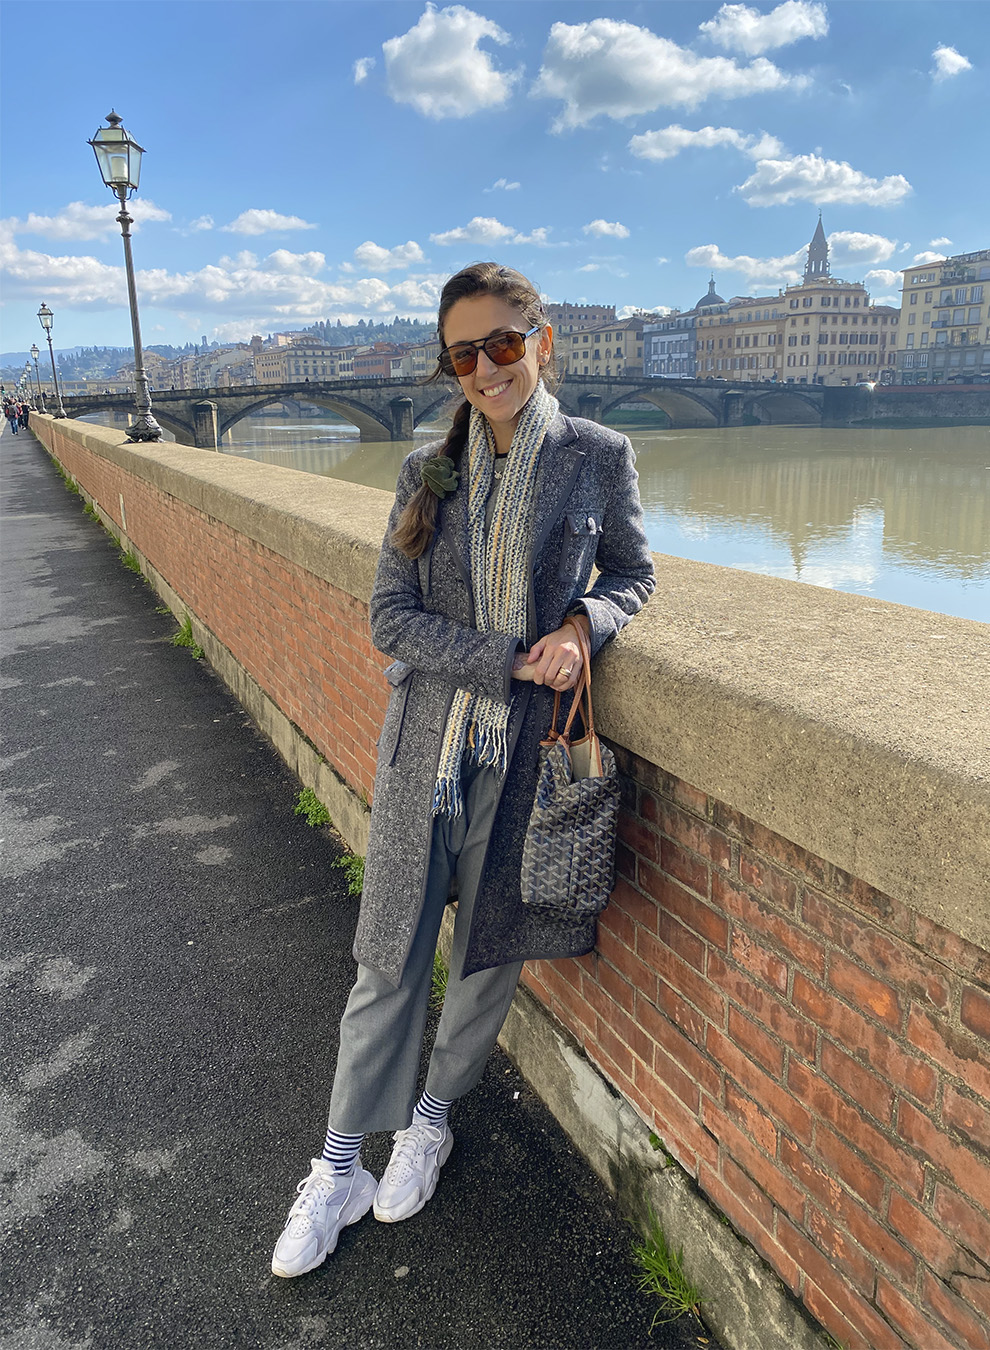 Malu Neves by the Arno river in Florence